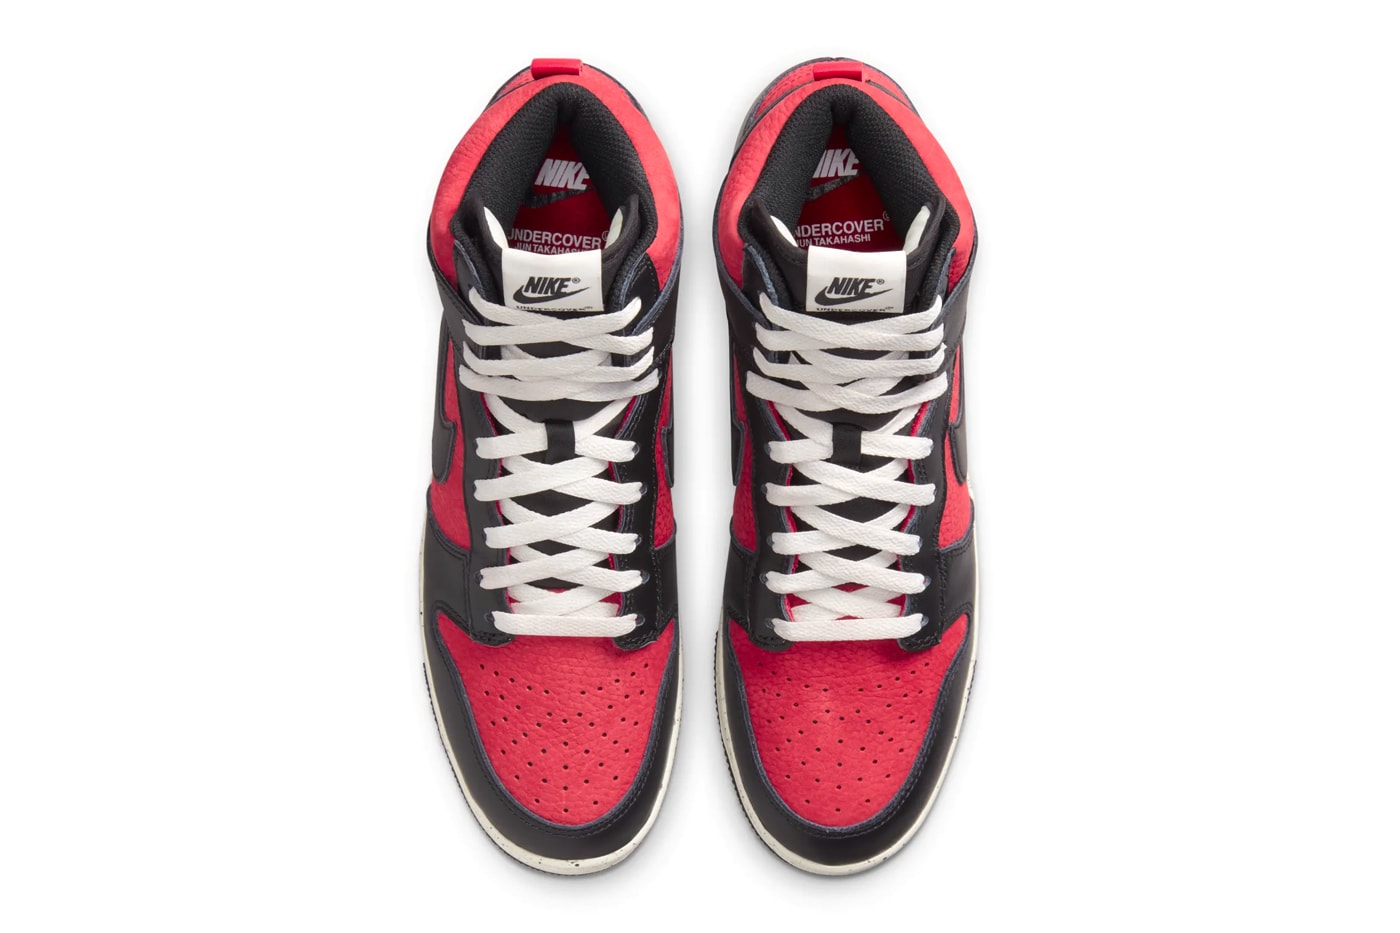 UNDERCOVER Nike Dunk High 1985 Gym Red Official Look Release Info DD9401-600 Date Buy Price 